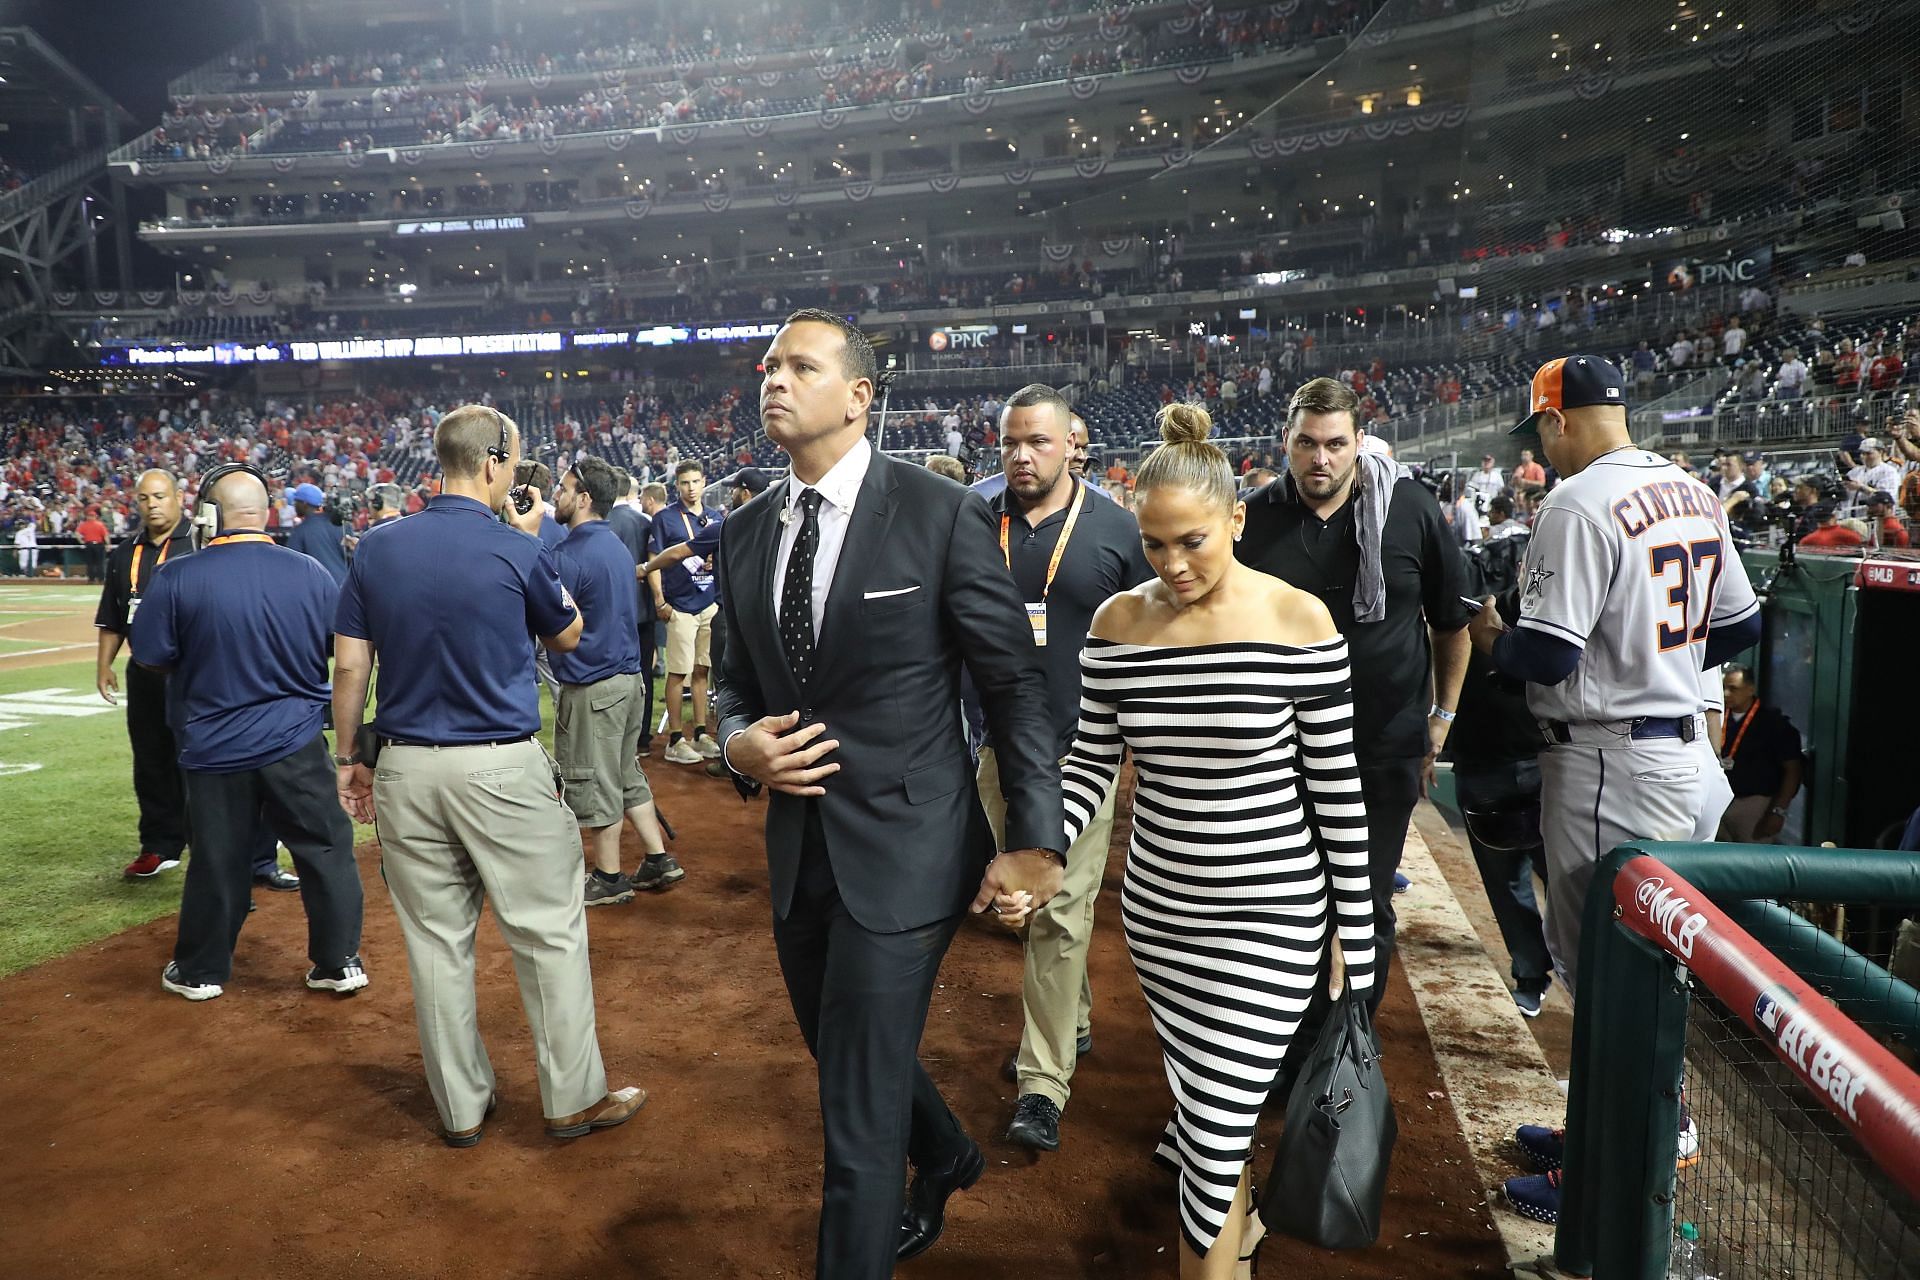 Alex Rodriguez and Jennifer Lopez attend the 89th MLB All-Star Game, presented by Mastercard at Nationals Park on July 17, 2018 in Washington, DC.